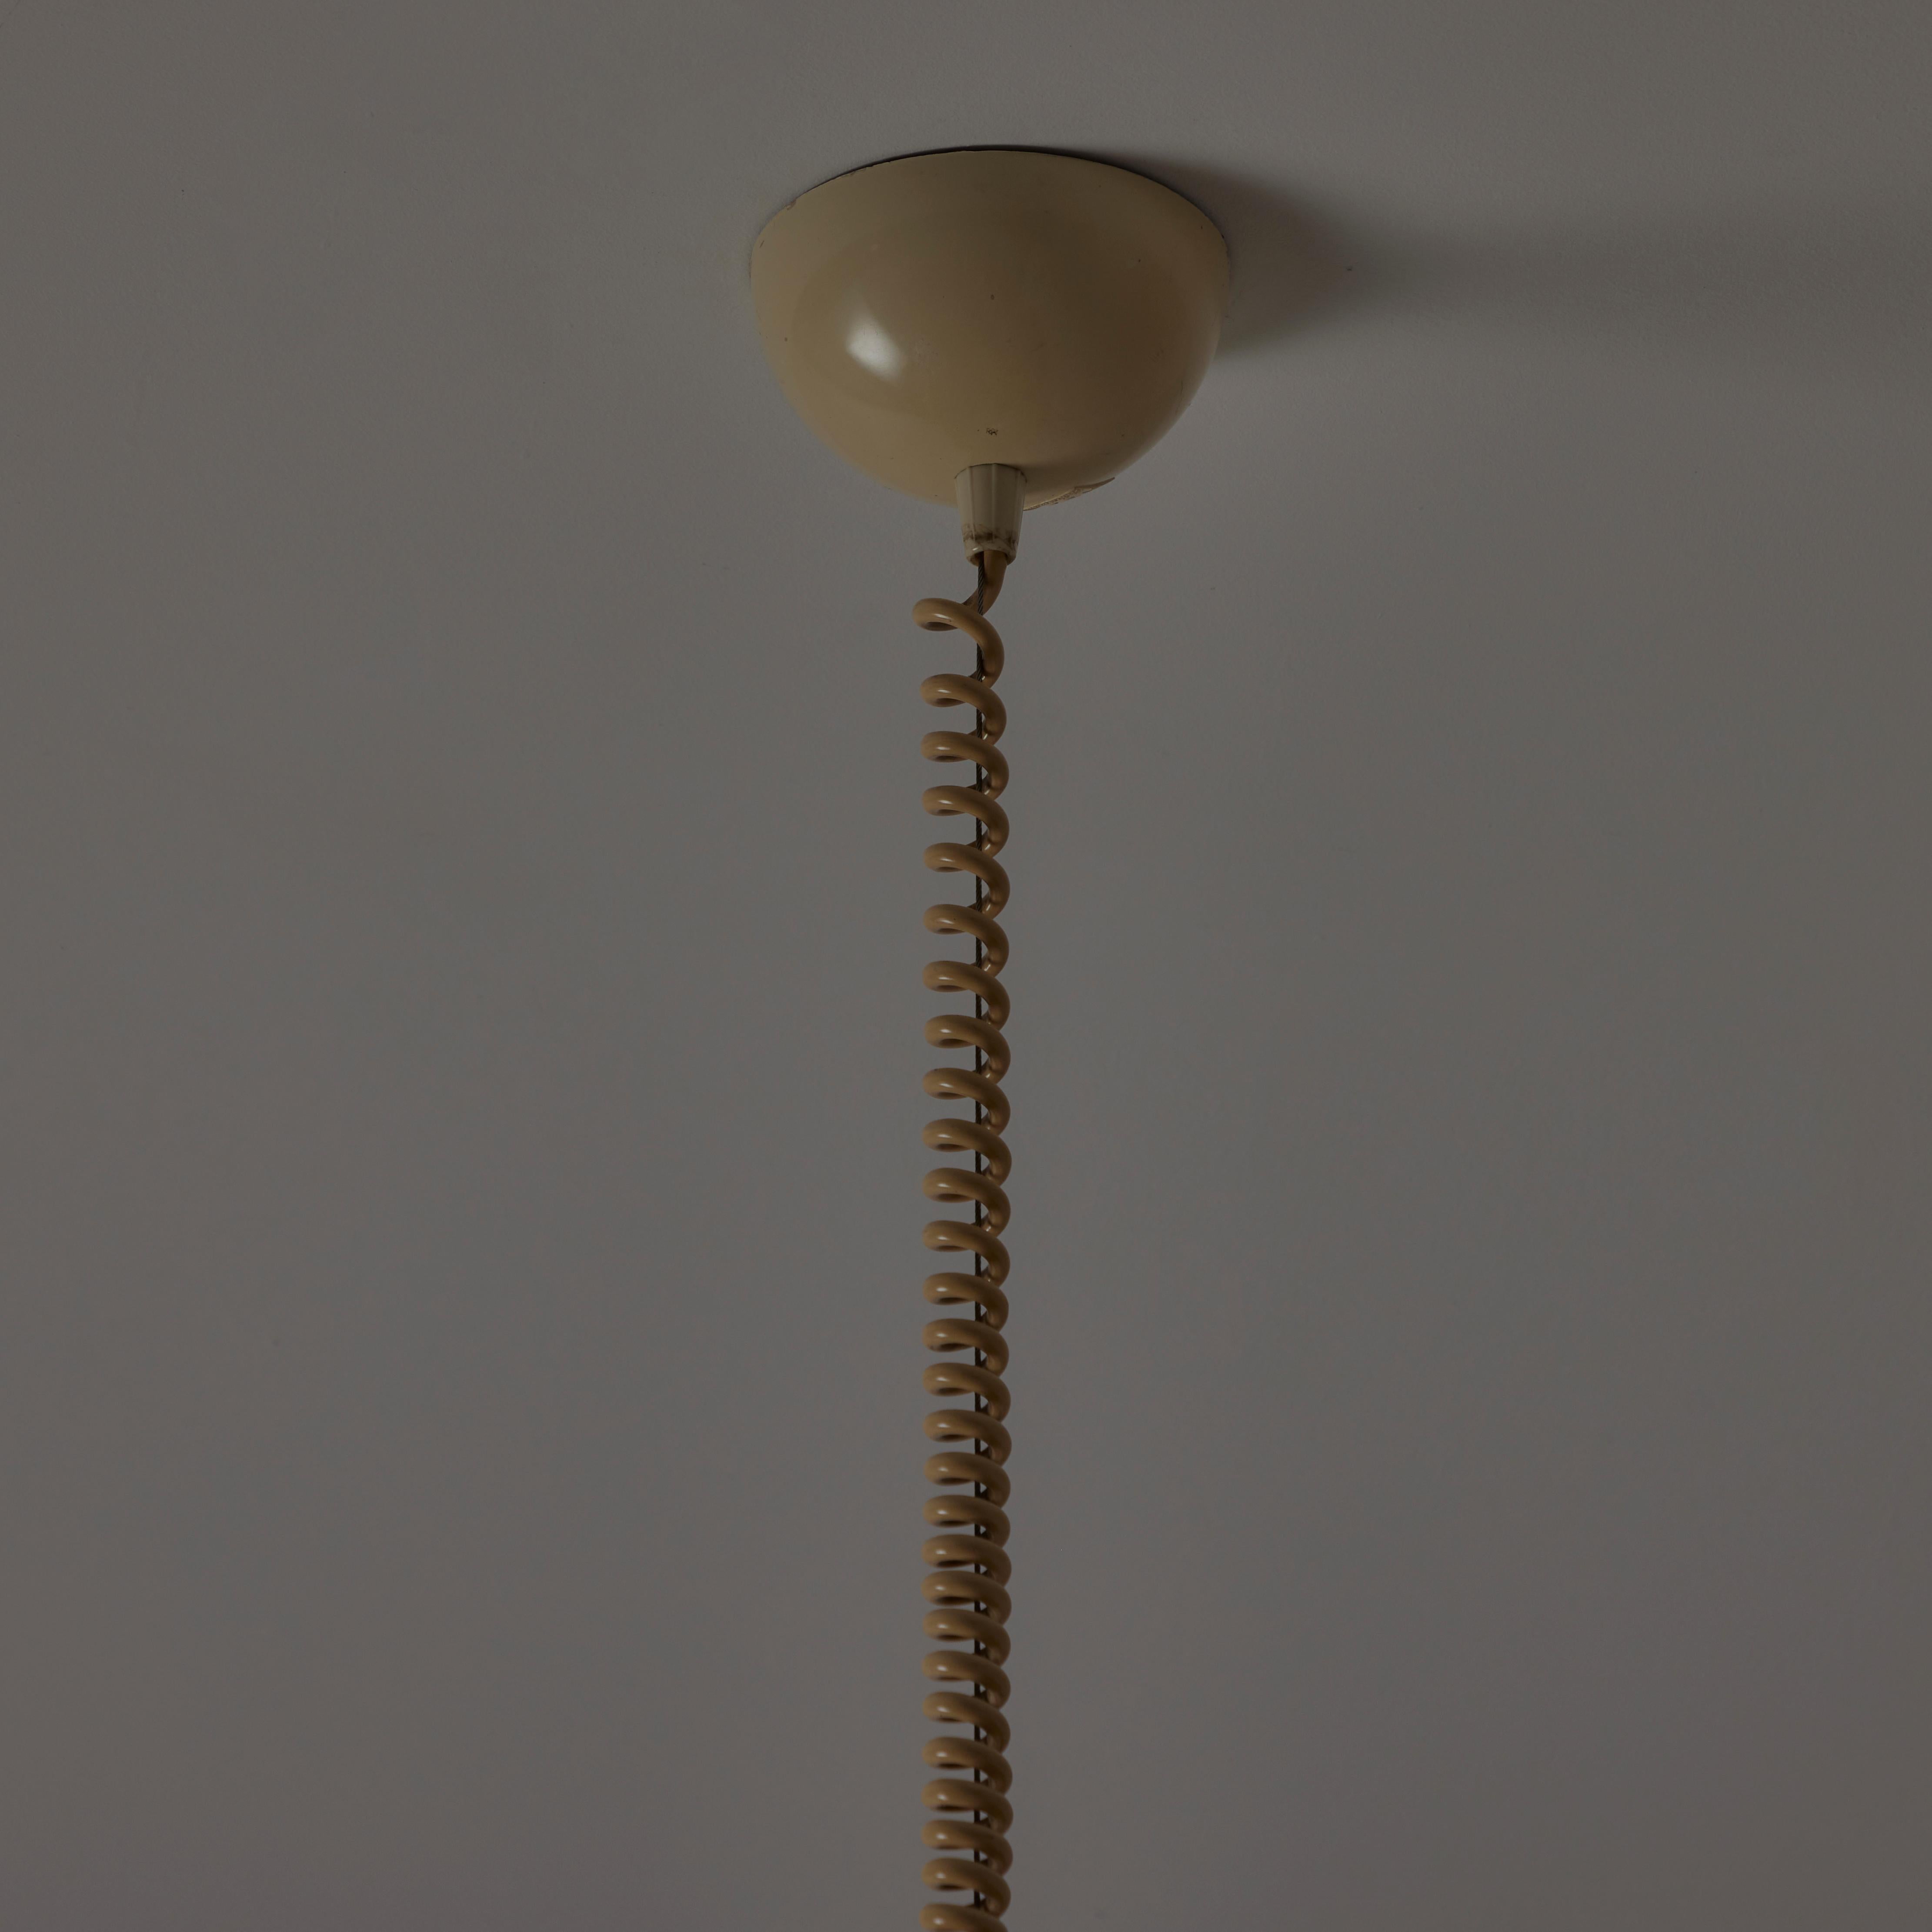 Rare 'Nuvola' Suspension Light by Tobia Scarpa for Flos For Sale 1